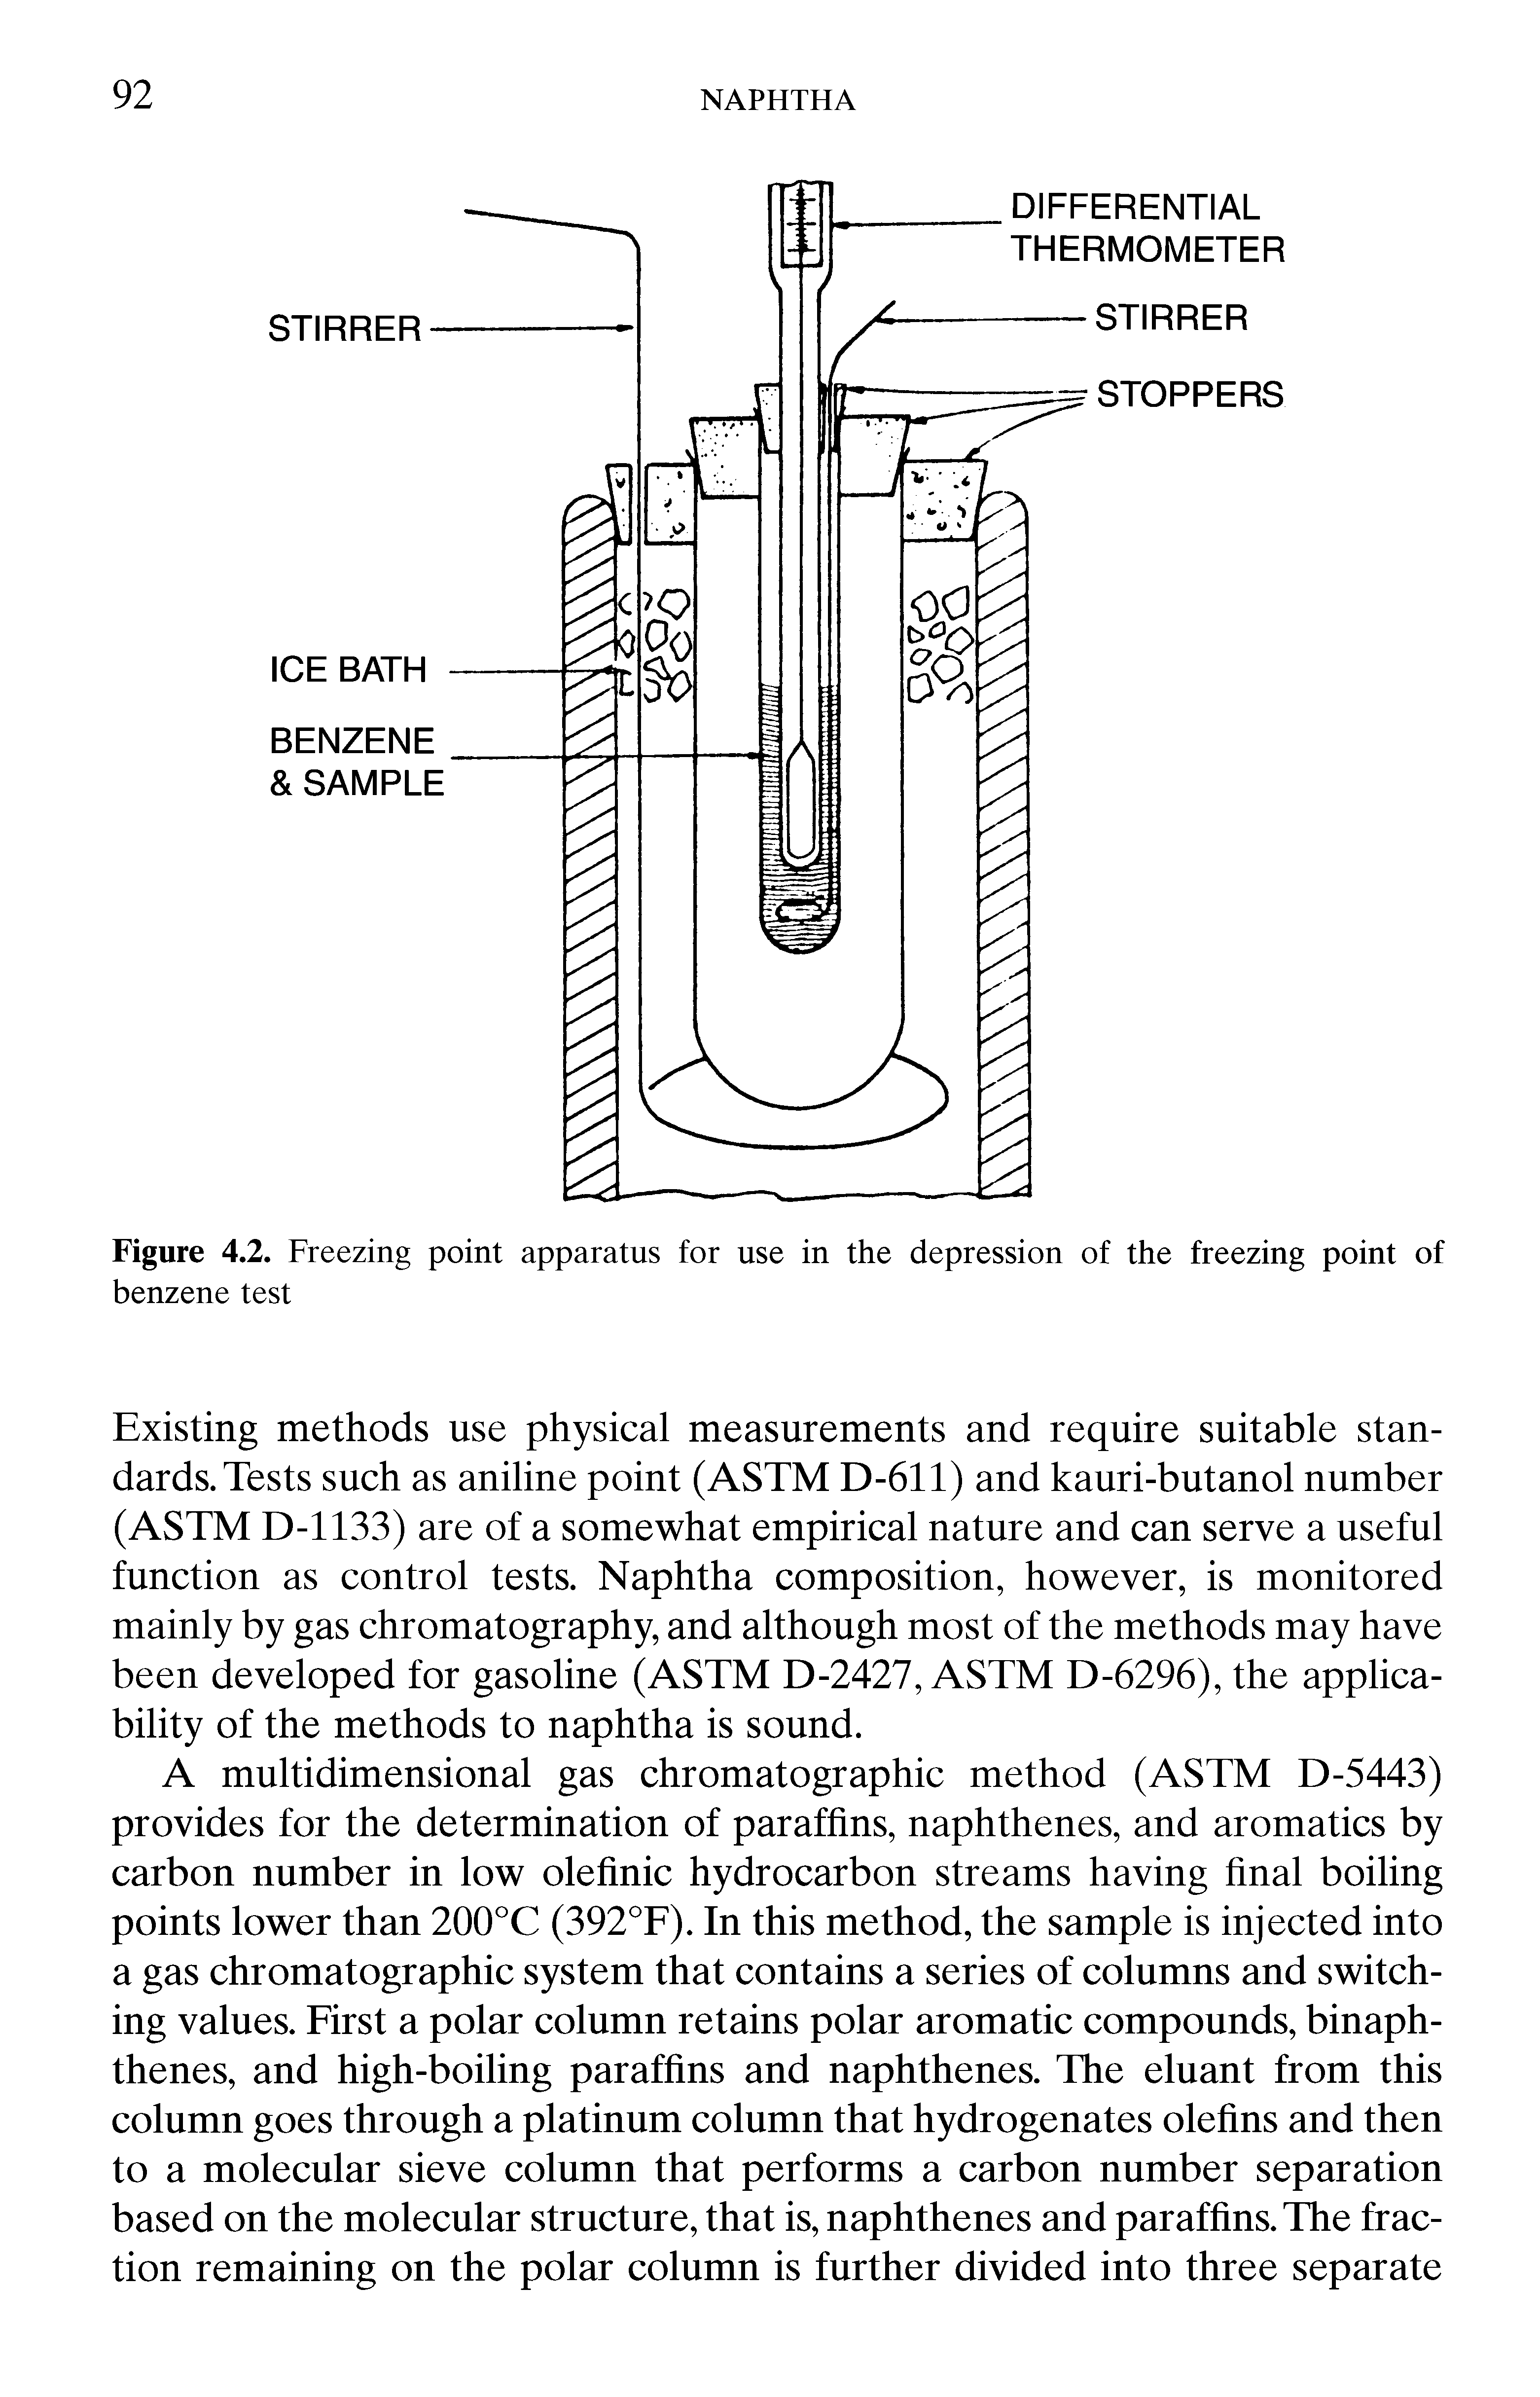 Figure 4.2. Freezing point apparatus for use in the depression of the freezing point of benzene test...